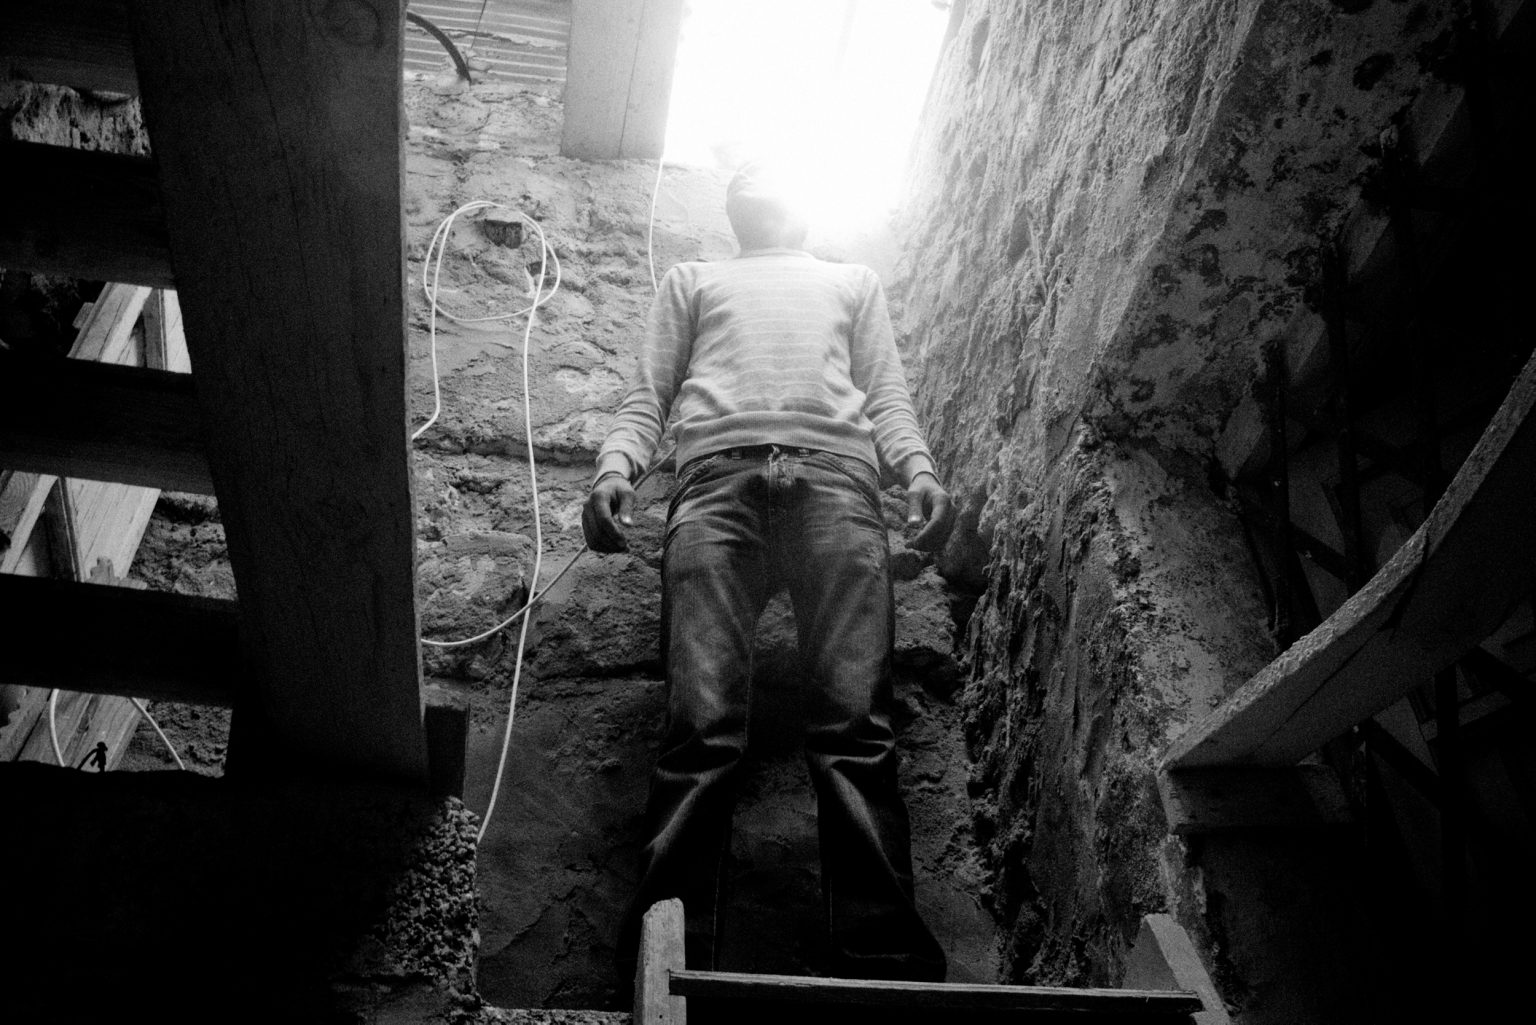 Lampedusa, April 2011-The story of Ahmed, one of the many young Tunisians landed on Lampedusa. Ahmed, a 23-year-old Tunisian who was being looked after by the Matinas, a Lampedusans family. The family gave him a bed, clothes,food, and they lived togheter for a year.
Ahmed in the house of the local family.

Lampedusa, aprile 2011-La storia di Ahmed, uno dei tanti giovani tunisini sbarcati a Lampedusa. Ahmed, un tunisino di 23 anniè stato accudito dai Matinas, una famiglia lampedusana. La famiglia gli ha dato un letto, dei vestiti e  cibo. Hanno vissuto insieme per un anno.Ahmed in casa della famiglia.